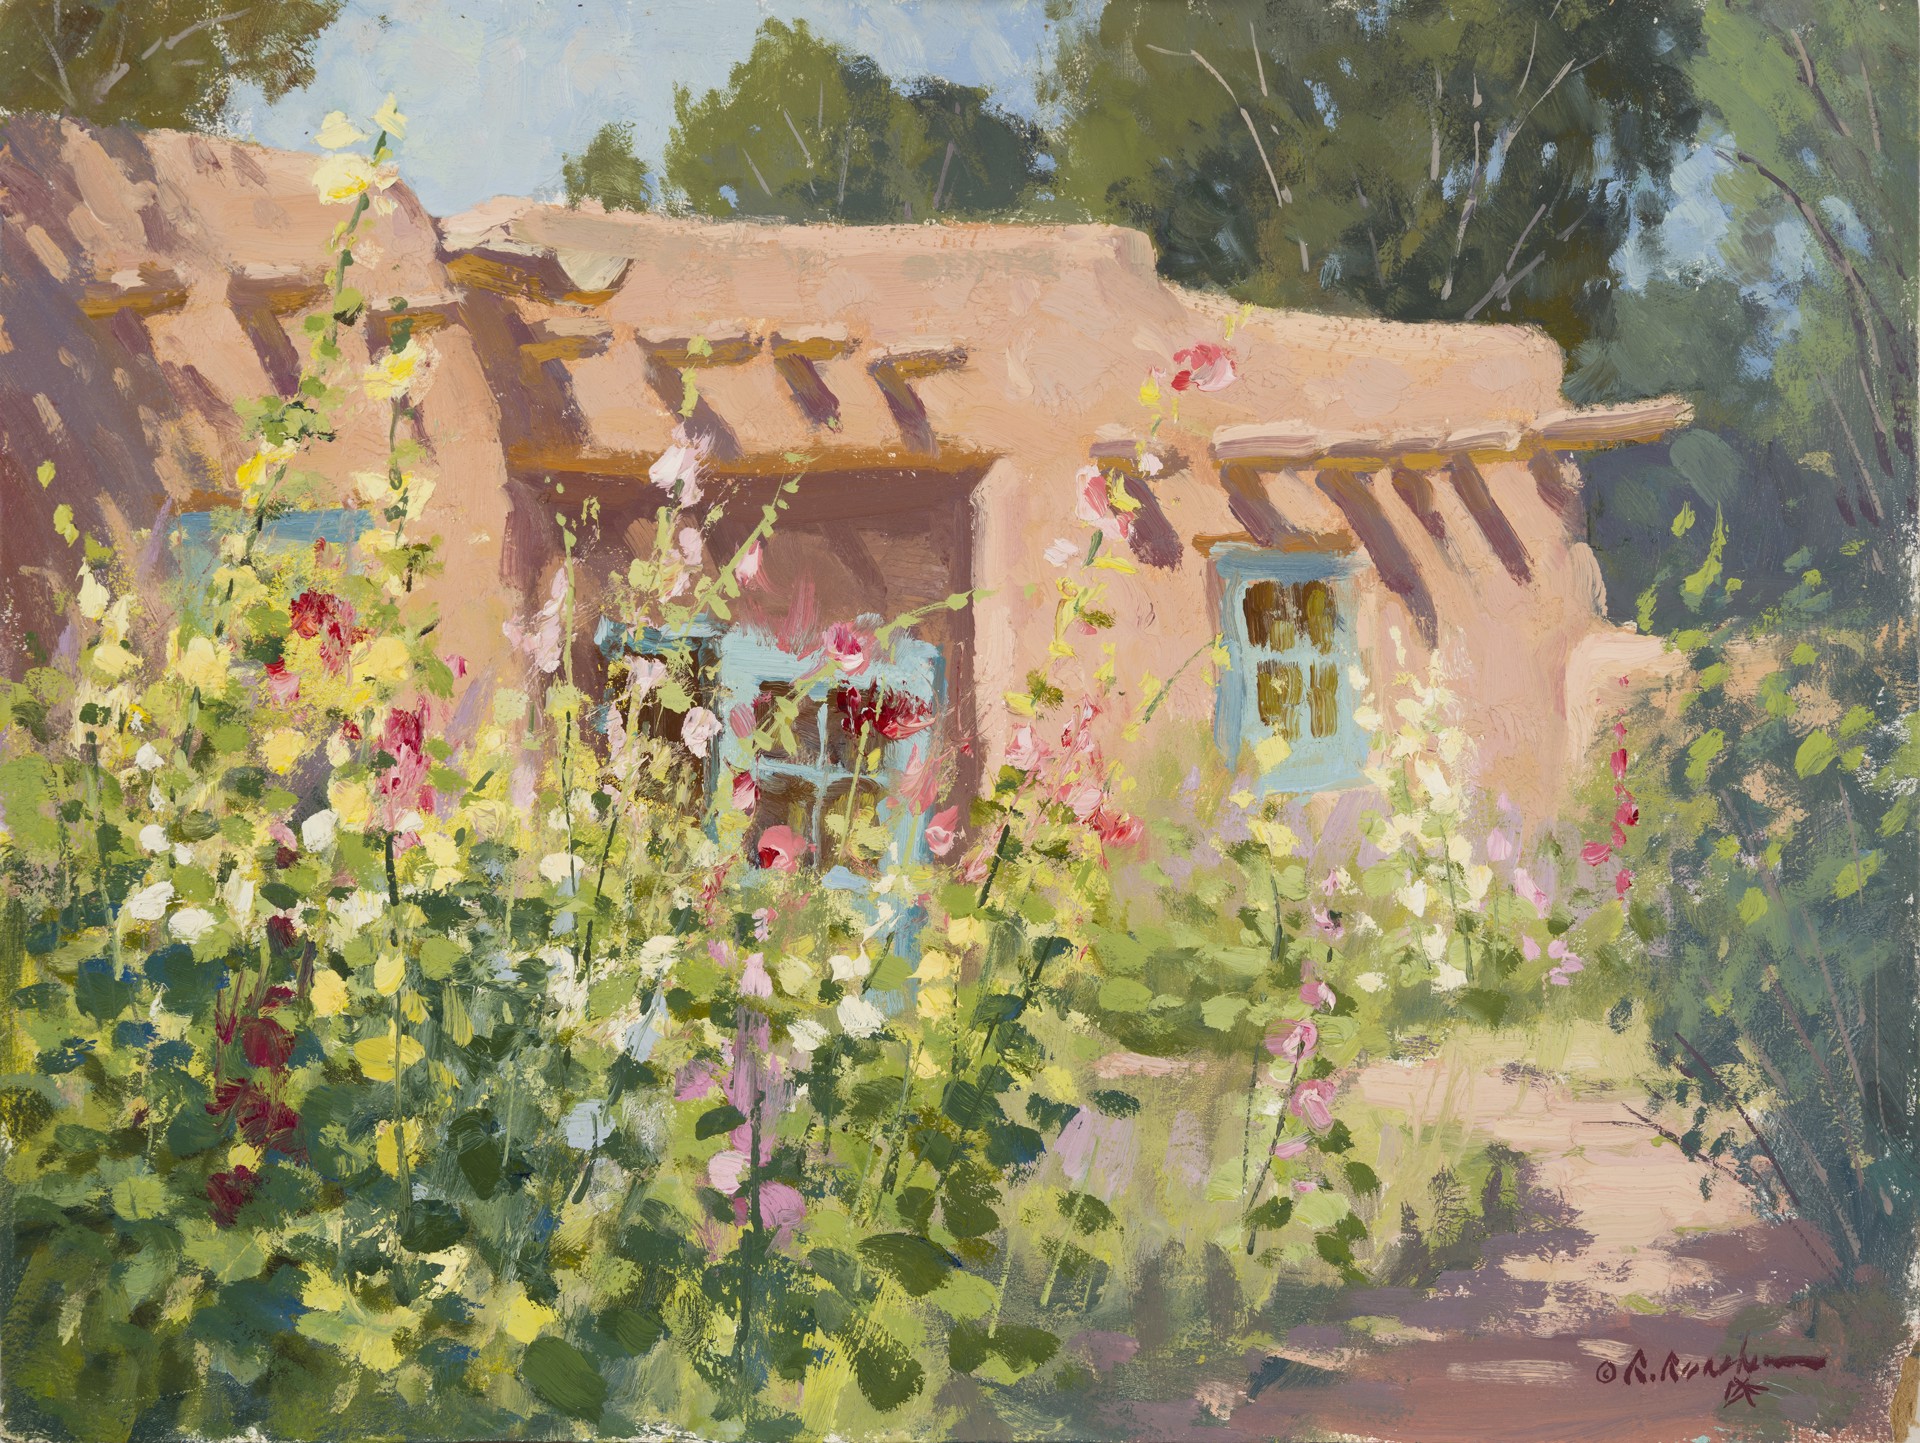 High Summer in Taos by Ron Rencher